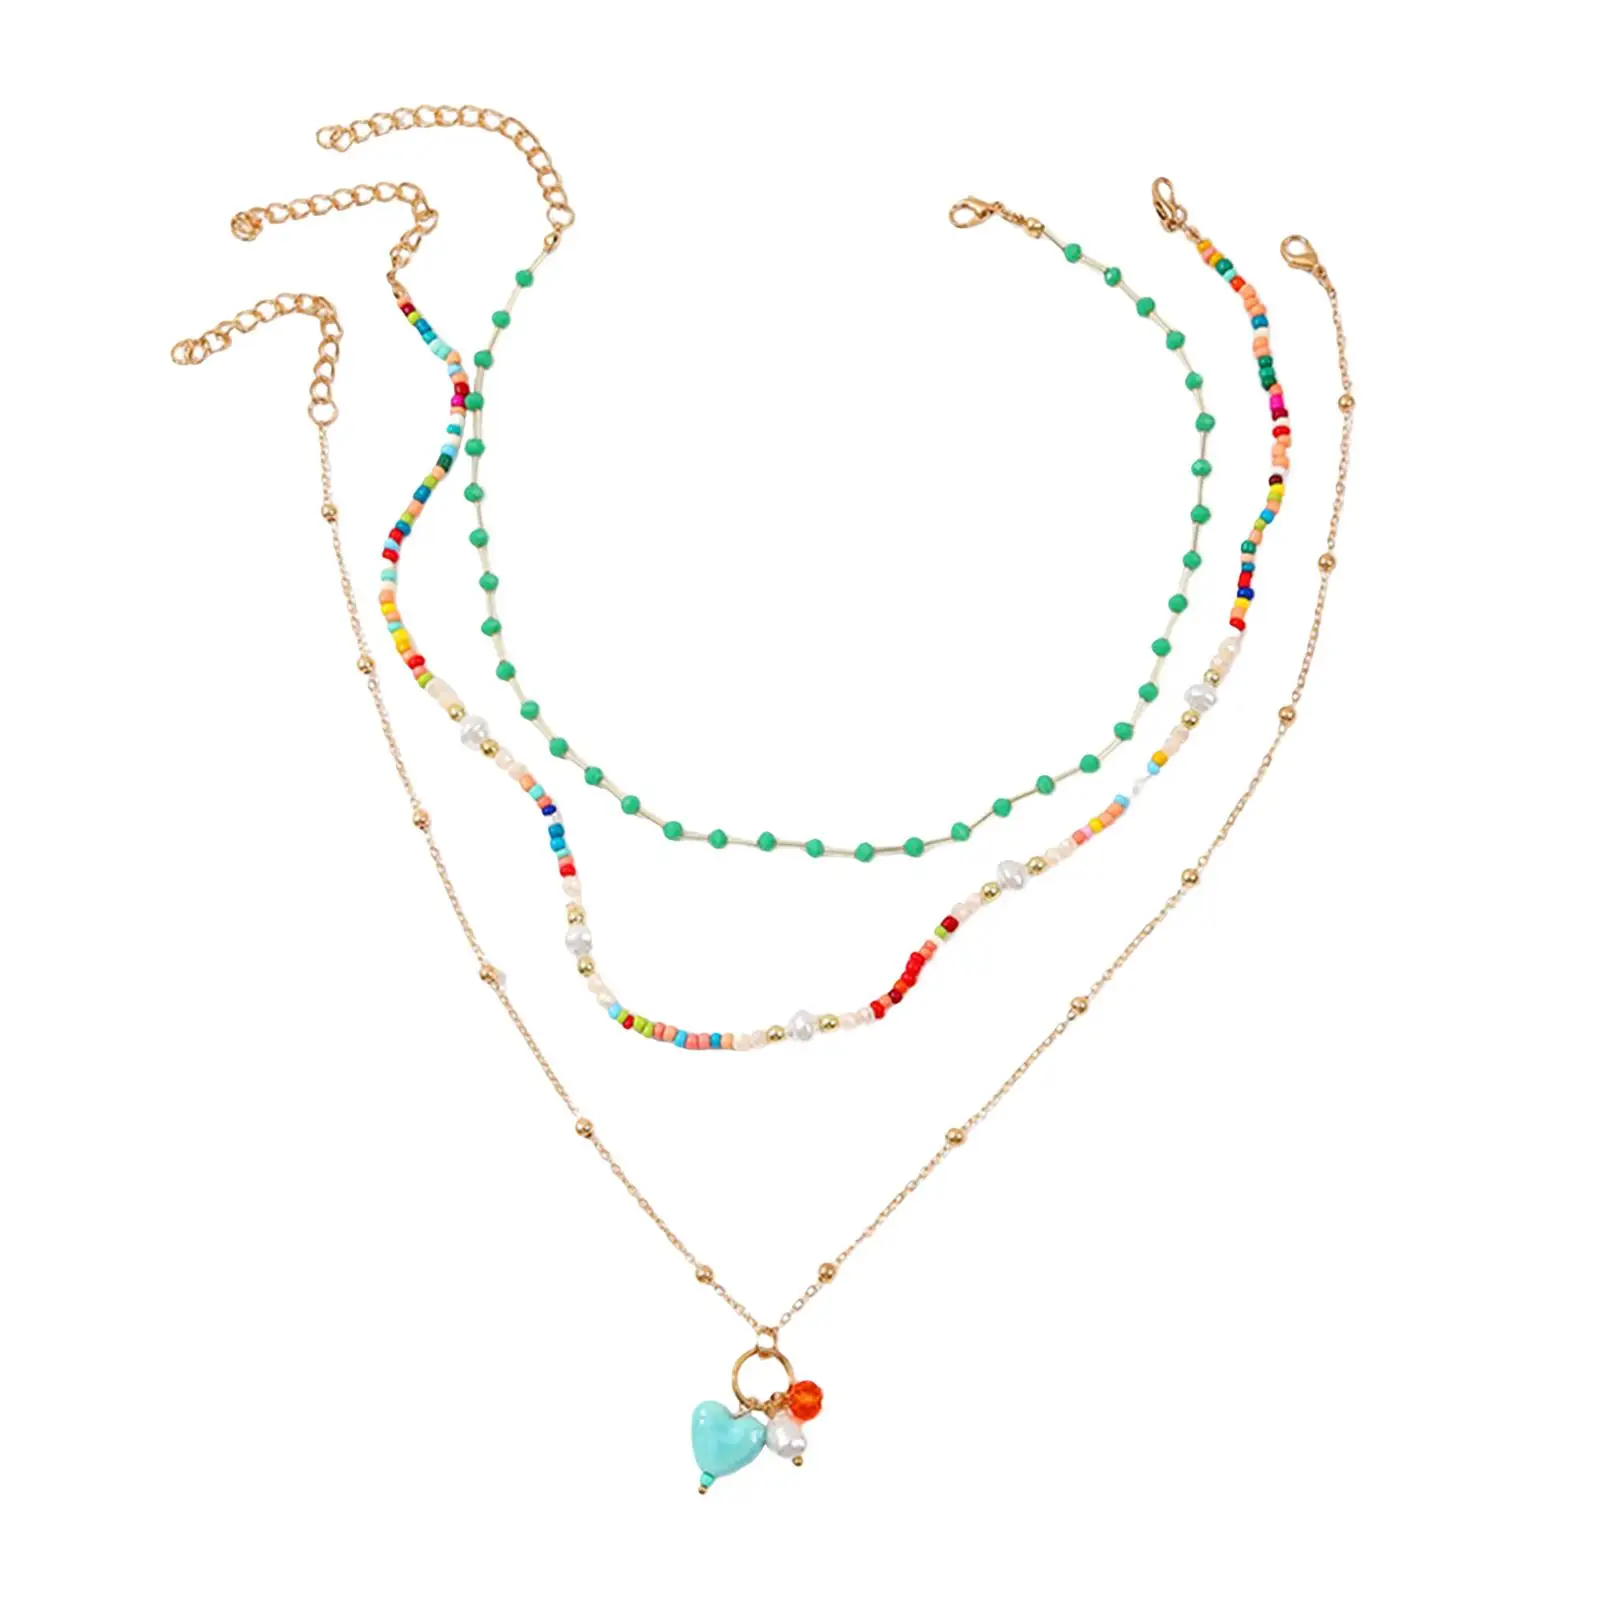 3x Layered Necklaces Set Mixed Multi Colored Cute Multilayer for Wedding